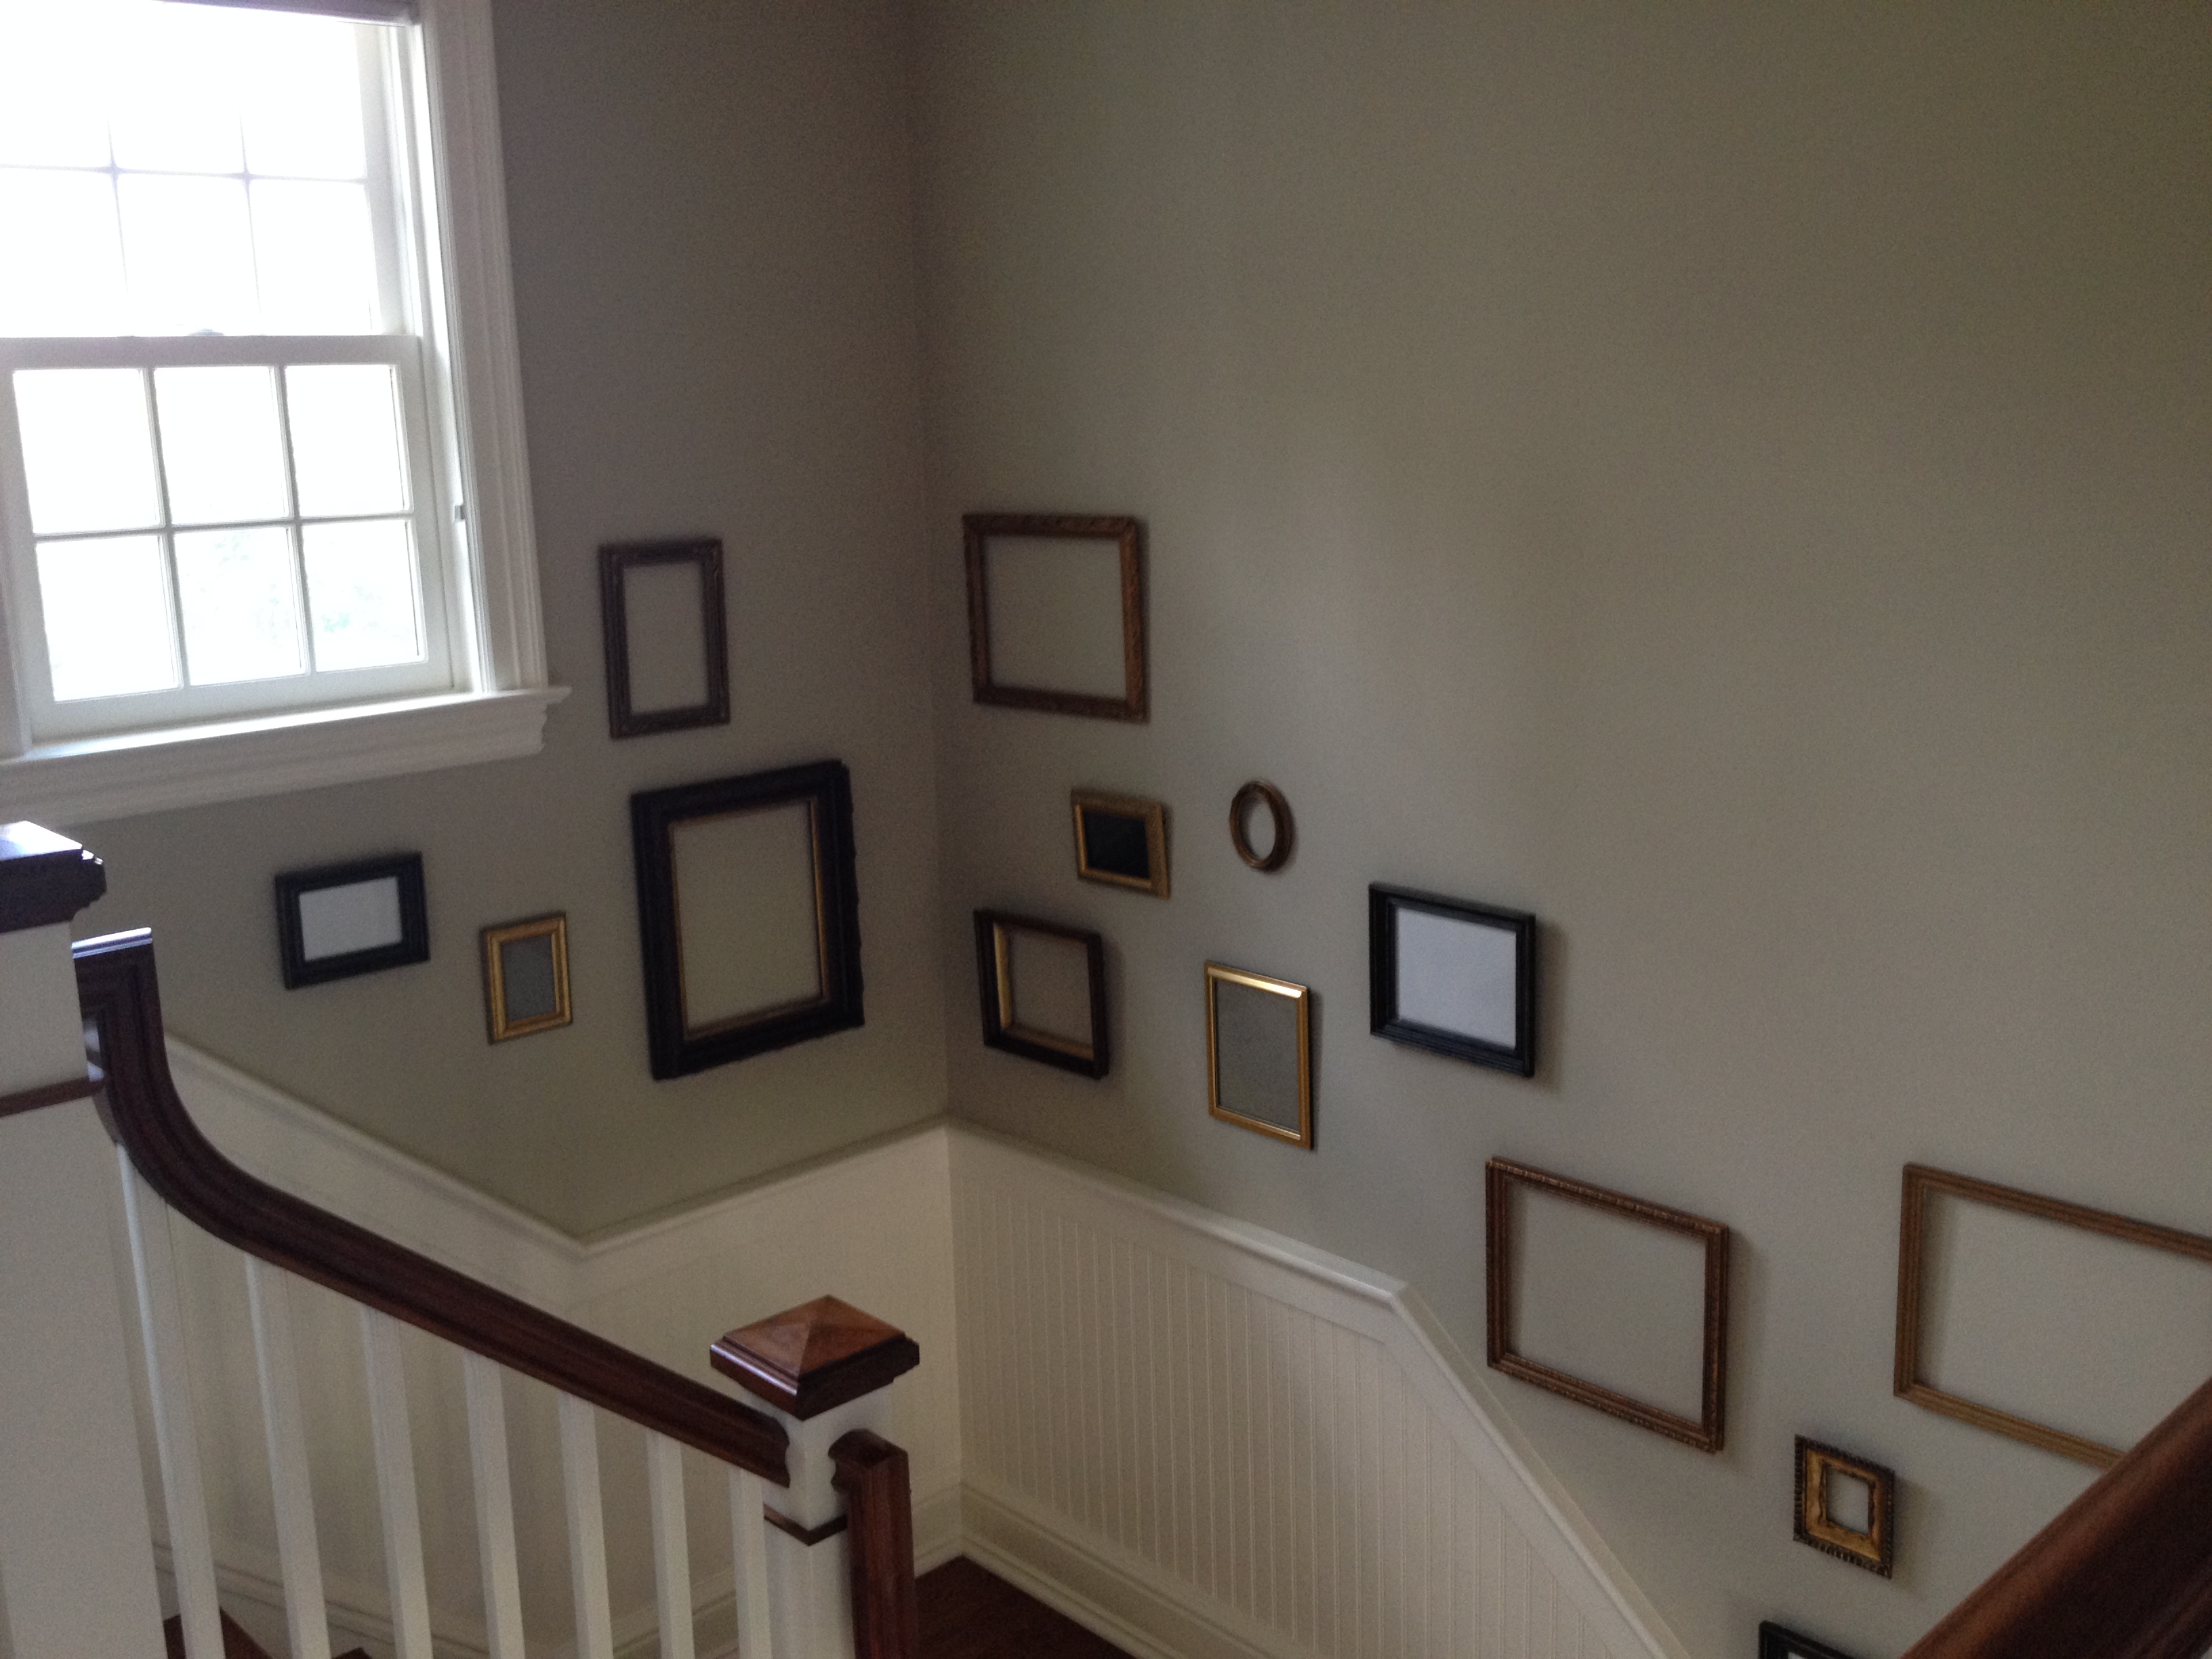 gallery wall with empty frames